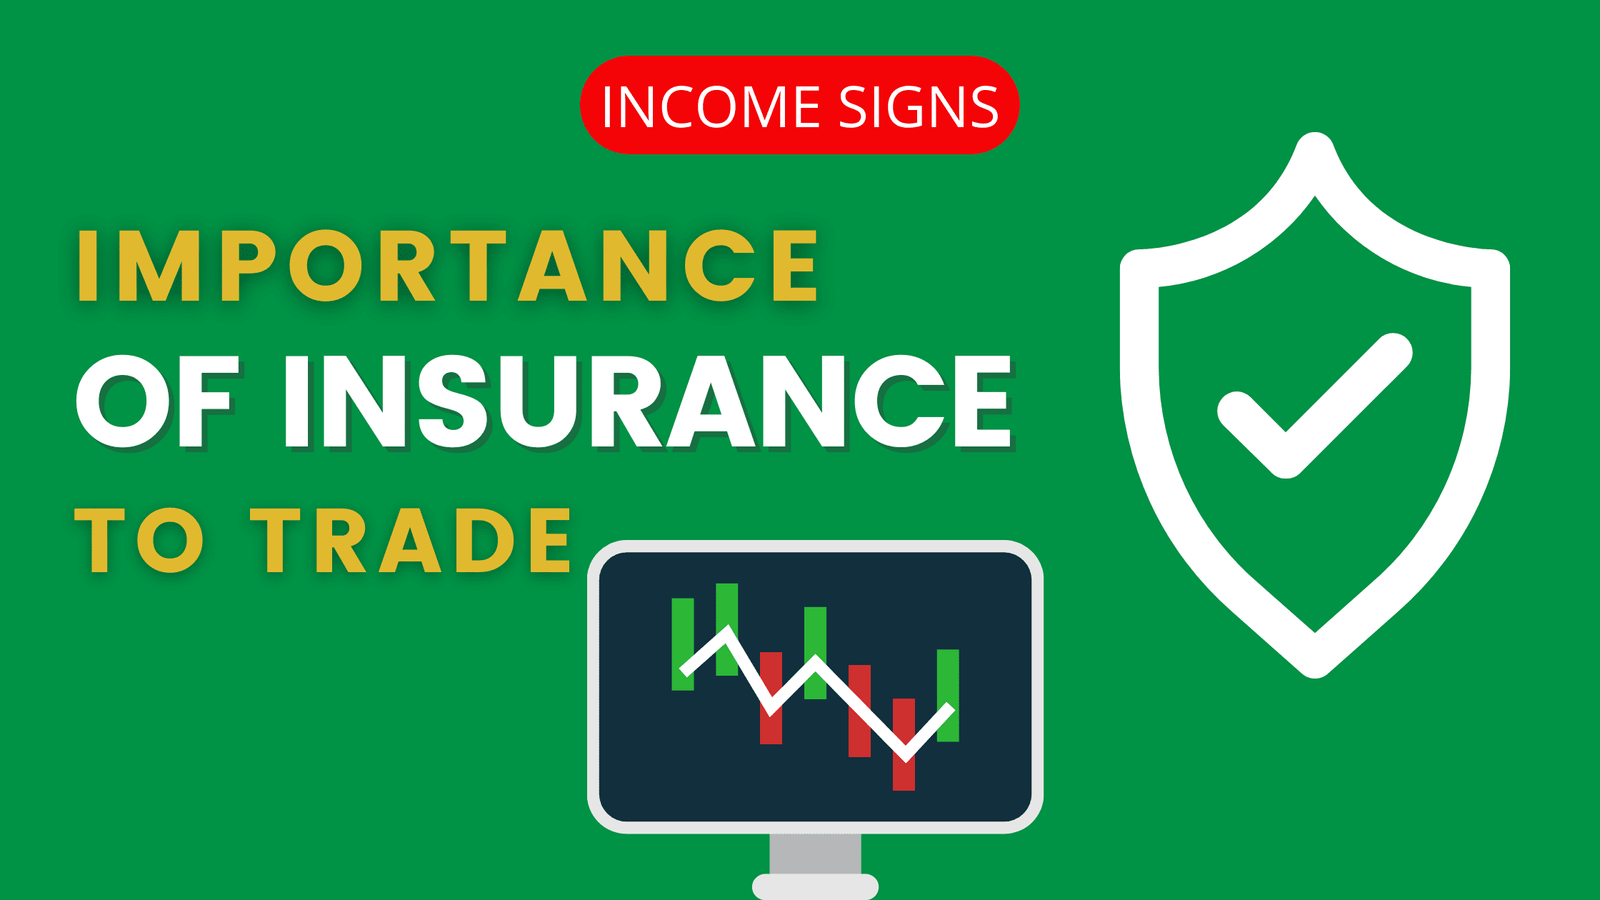 Importance of Insurance to Trade - Income Signs